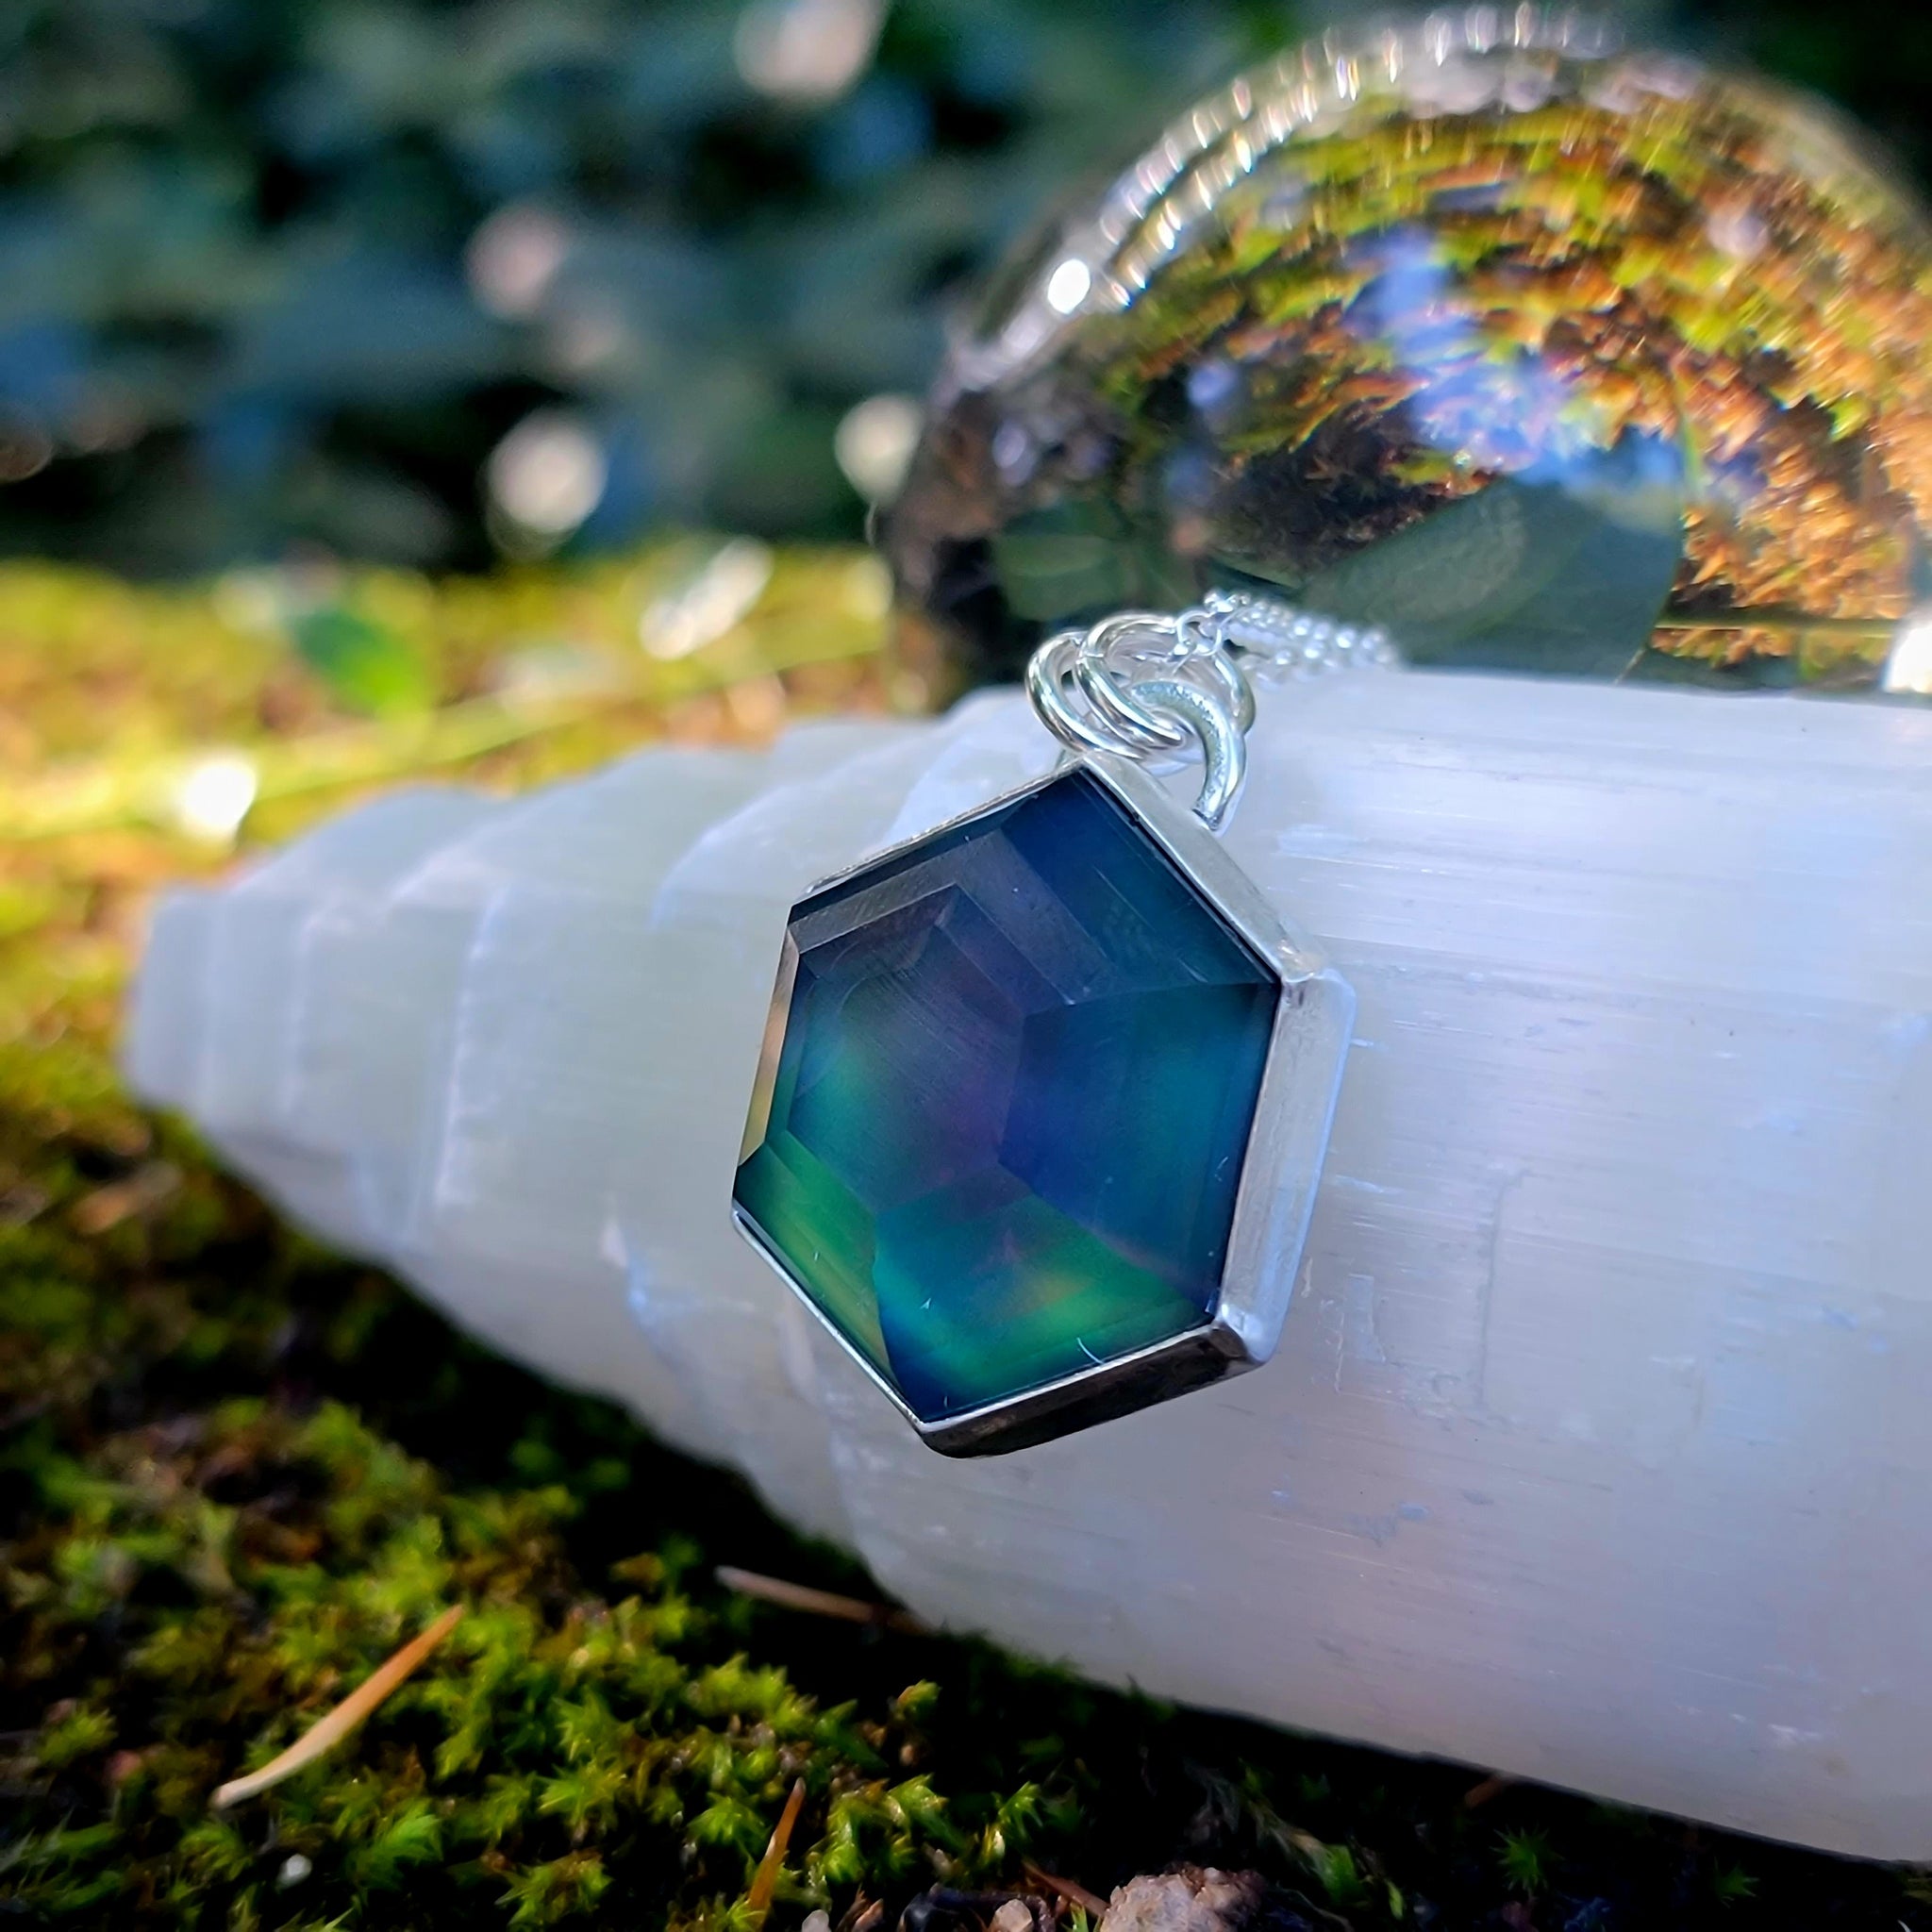 Rainbow Magic Faceted Opal Hexagon Doublet Pendant in Sterling Silver